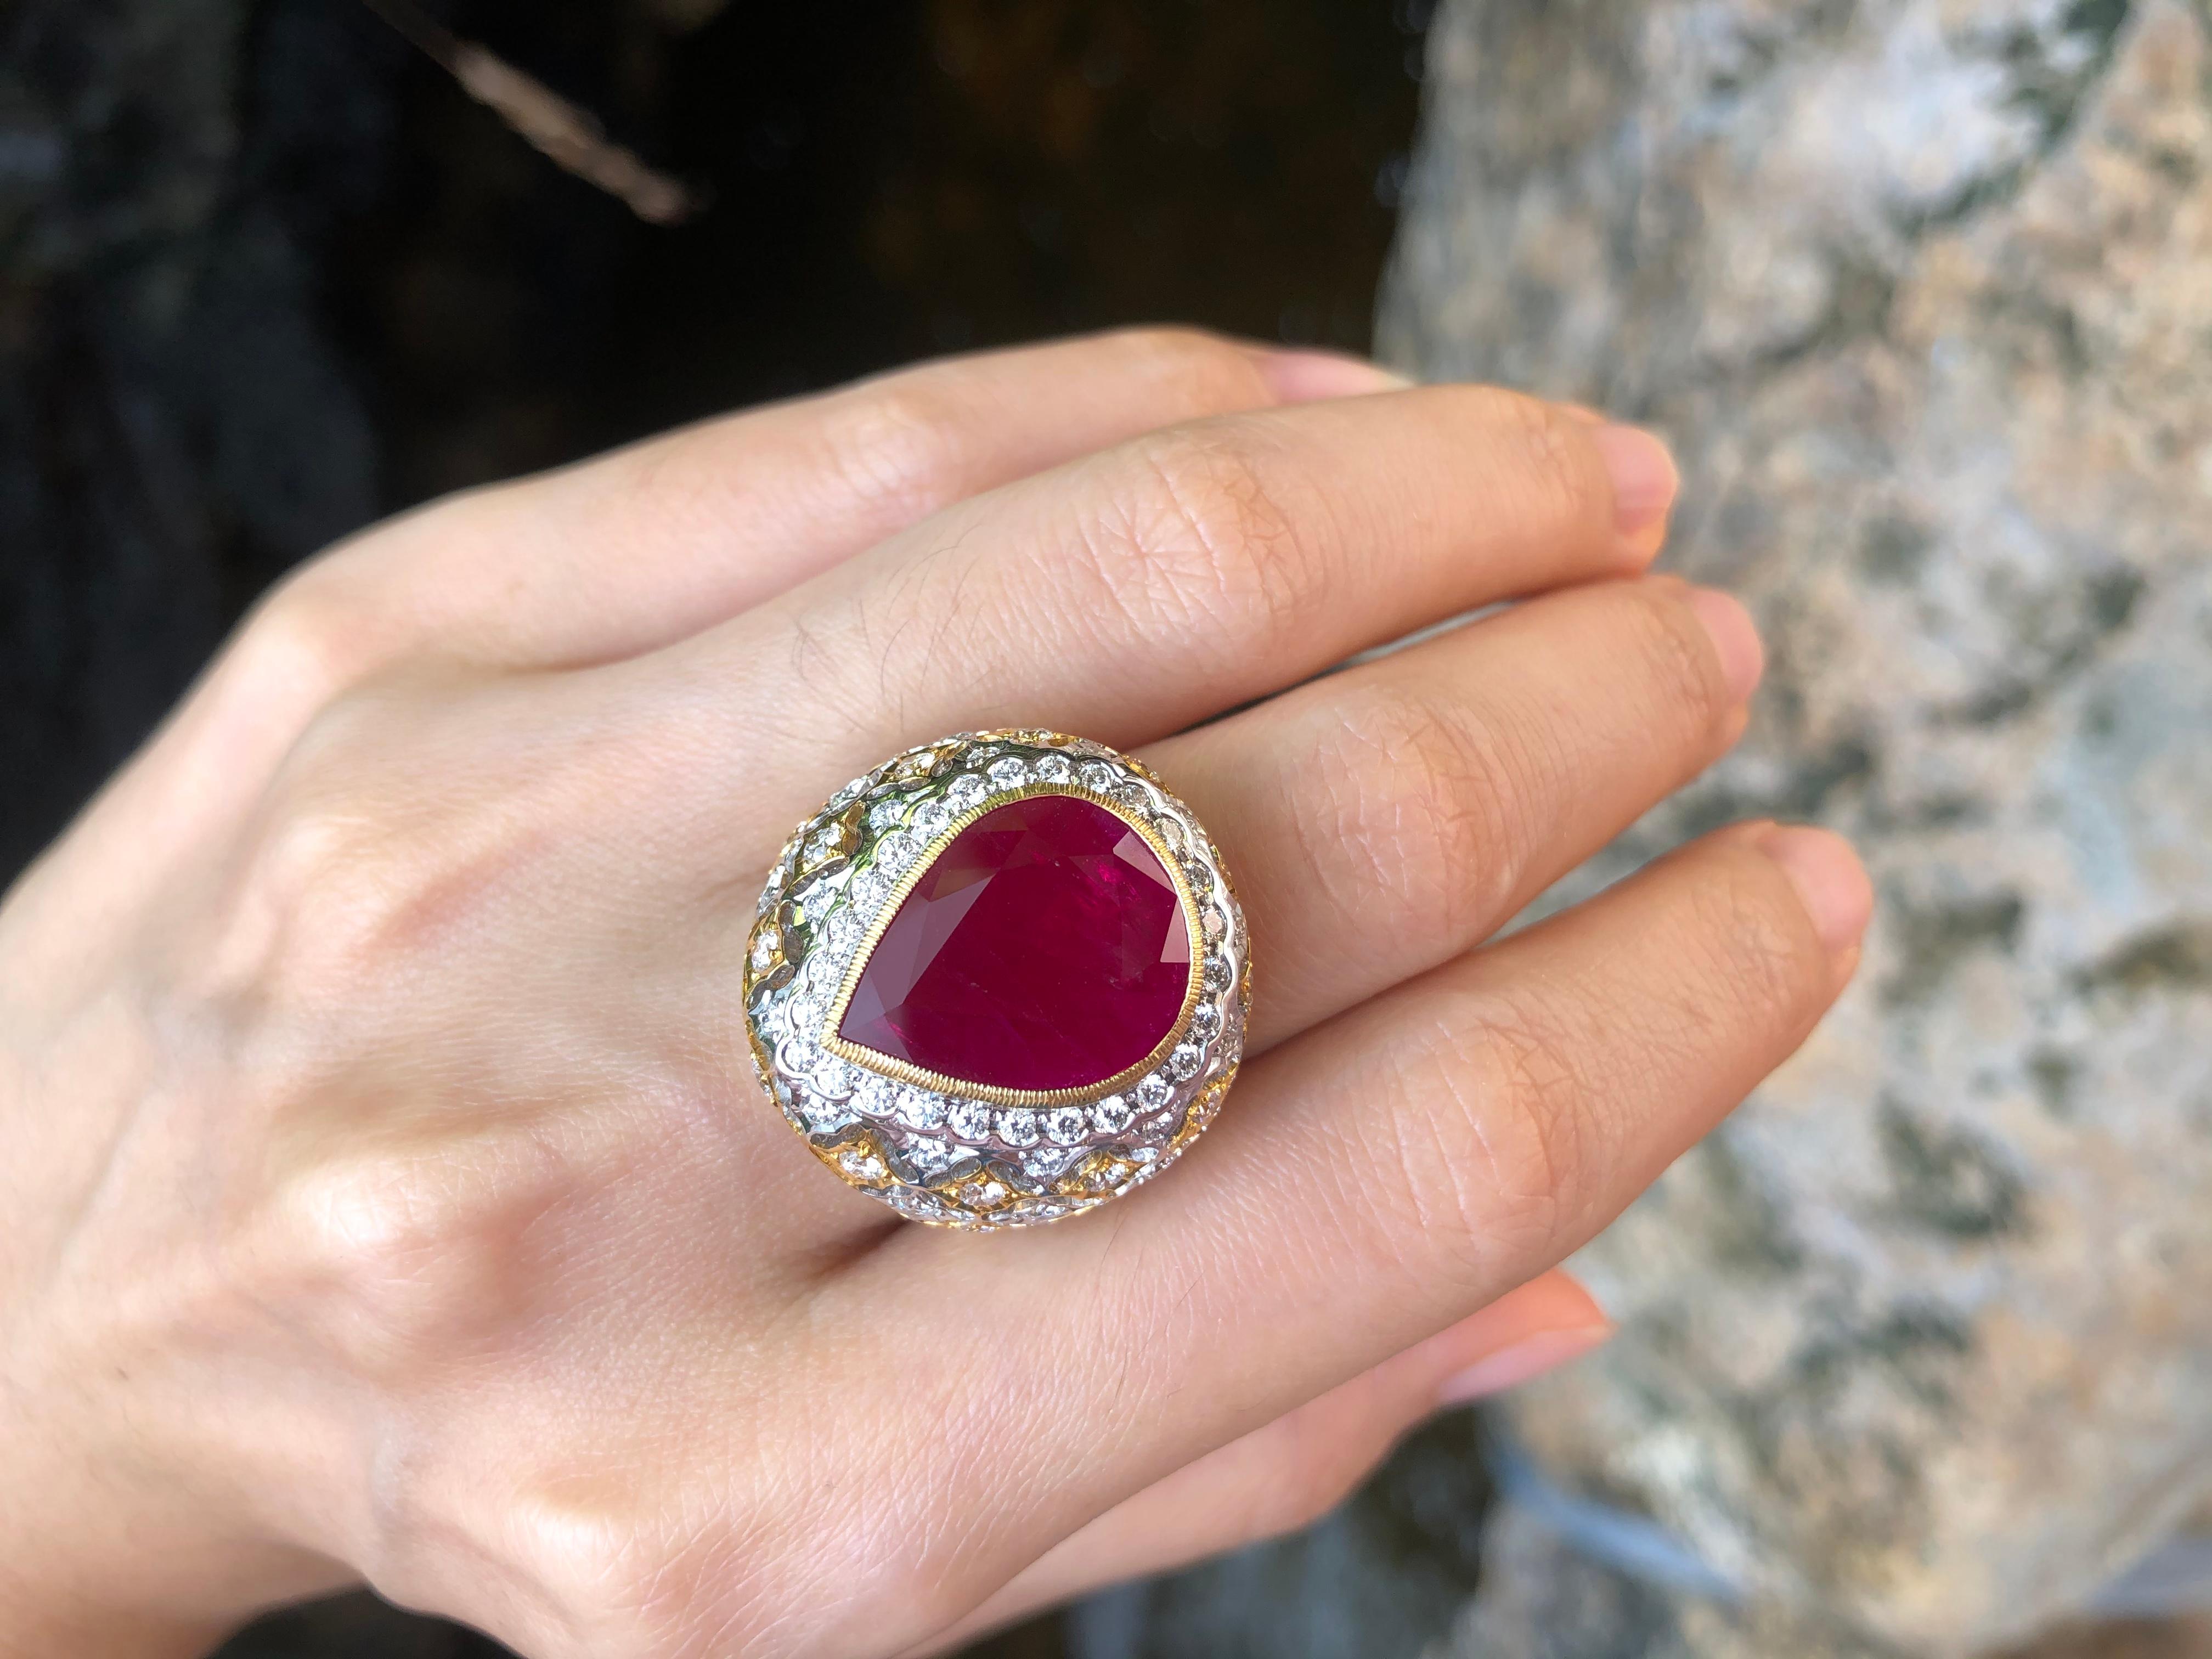 Ruby 8.34 carats with Diamond 1.96 carats Ring set in 18 Karat Gold Settings

Width:  1.4 cm 
Length: 1.8 cm
Ring Size: 57
Total Weight: 20.78 grams

